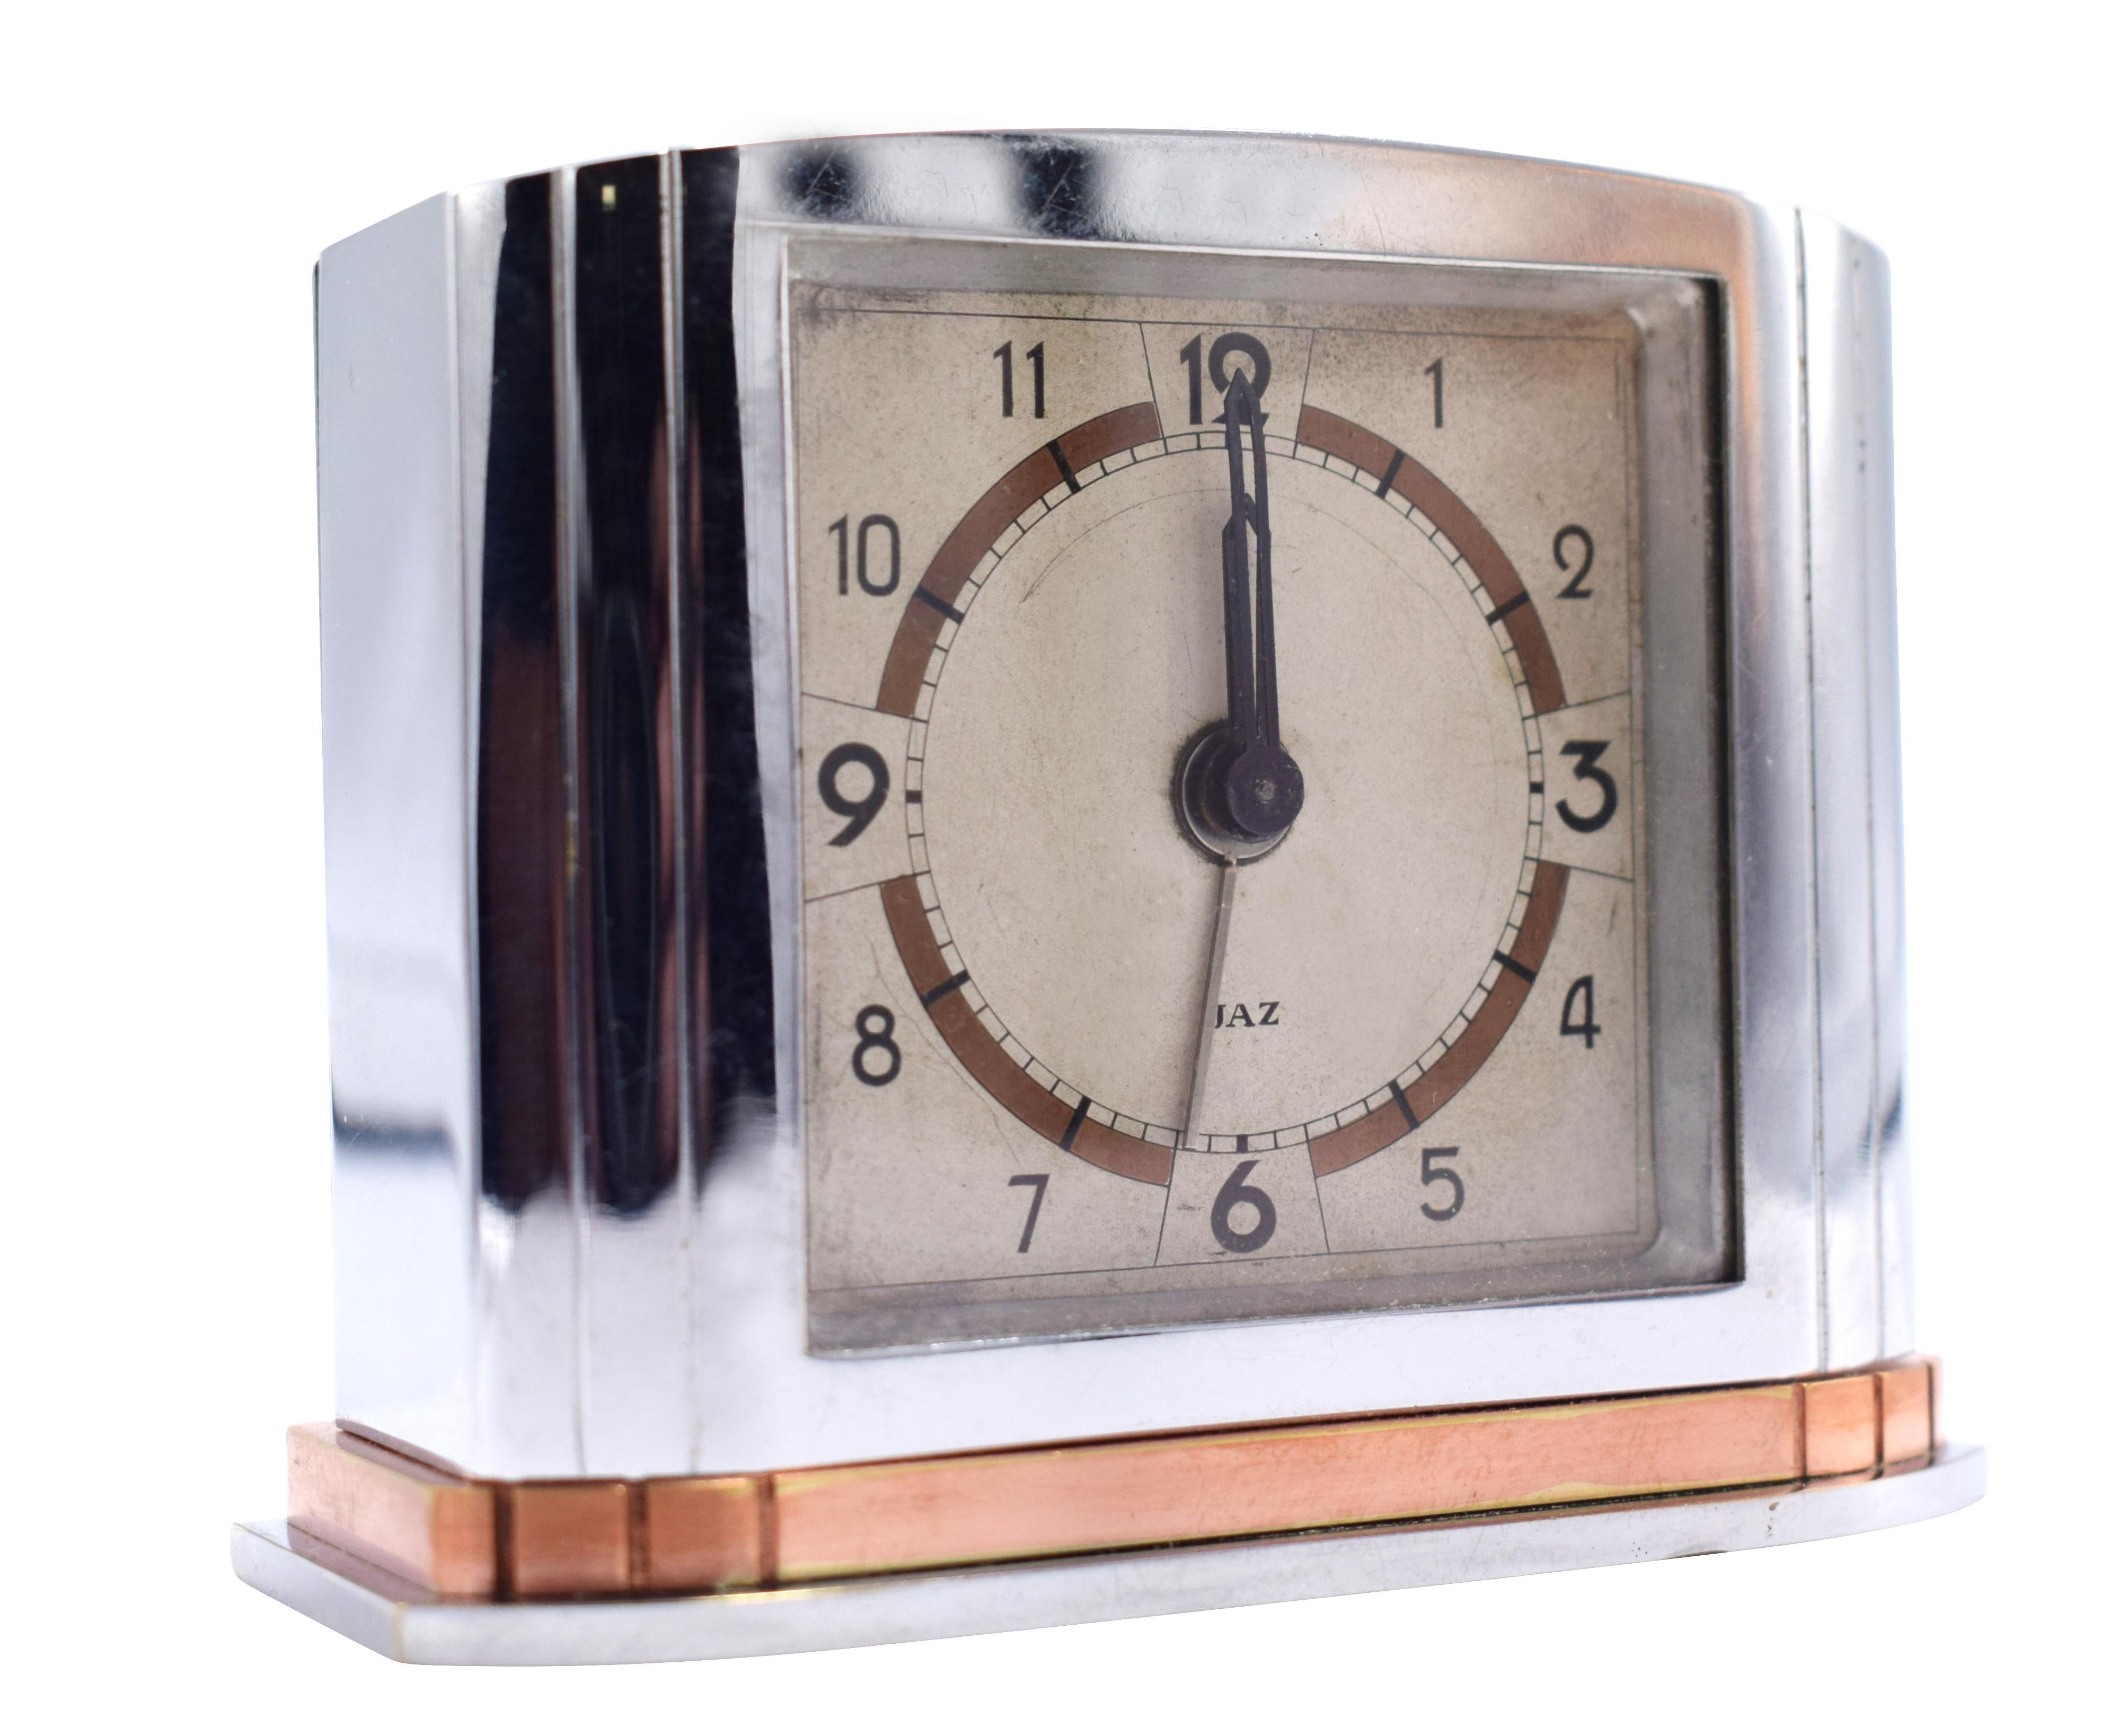 Very cute and quite rare little Art Deco chrome French alarm clock by the well known makers 'Jaz'. This clock is a real delight and totally authentic. Quite a weighty little piece and in above average condition. 95% of the chrome is crisp and clean.